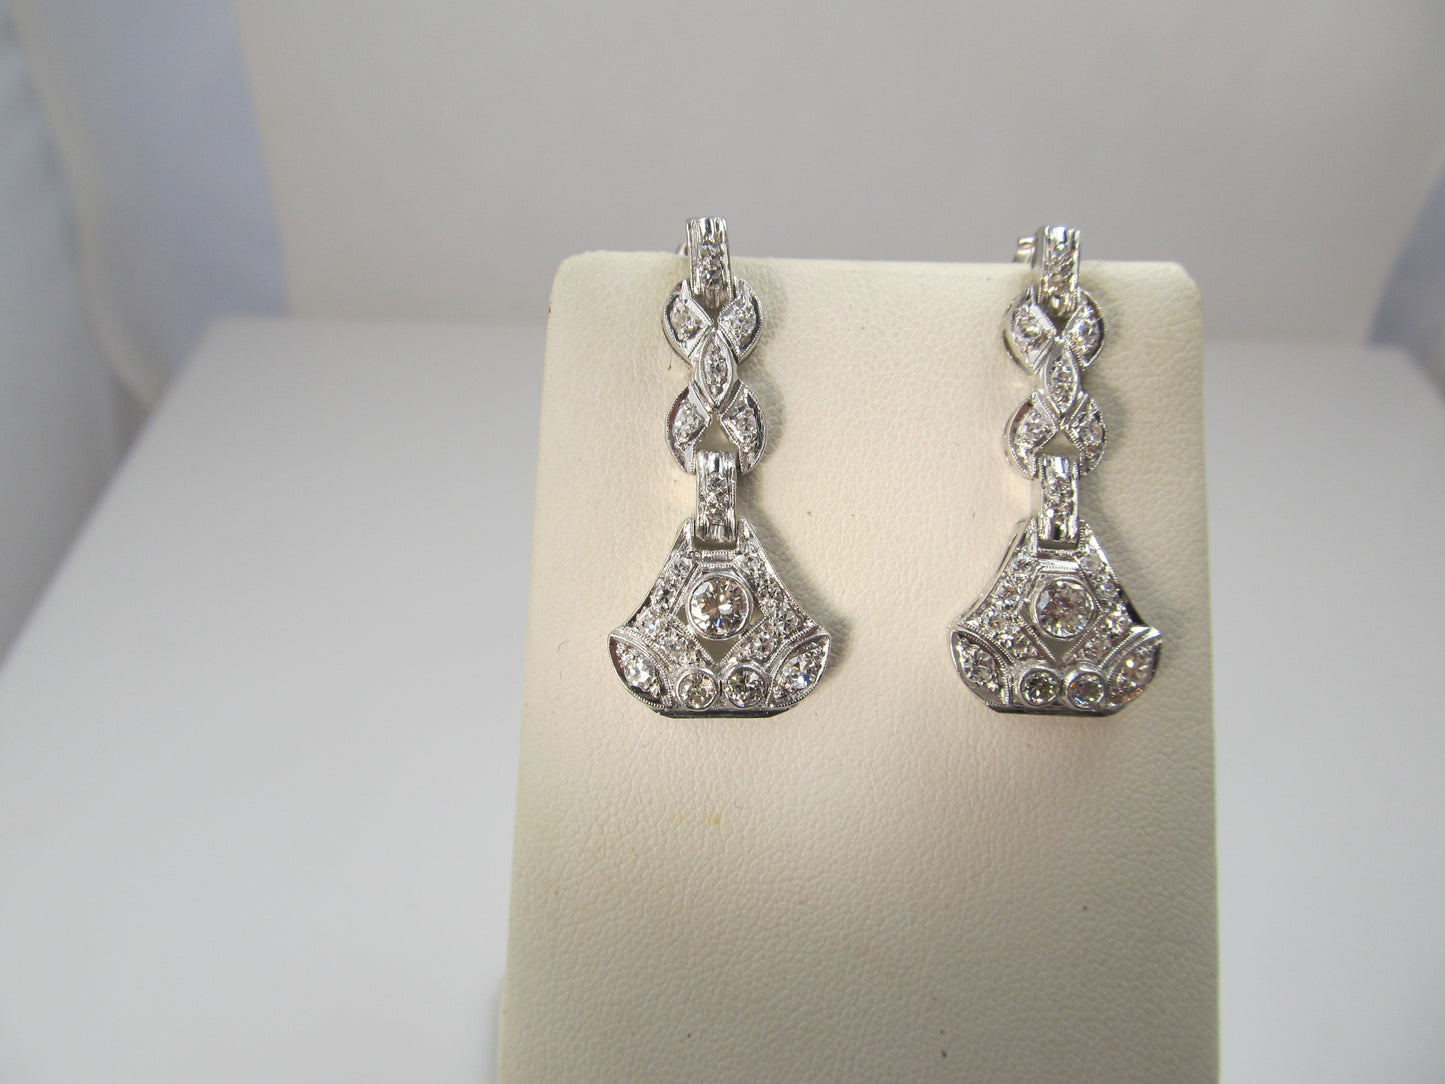 Vintage platinum drop earrings with 2cts in diamonds